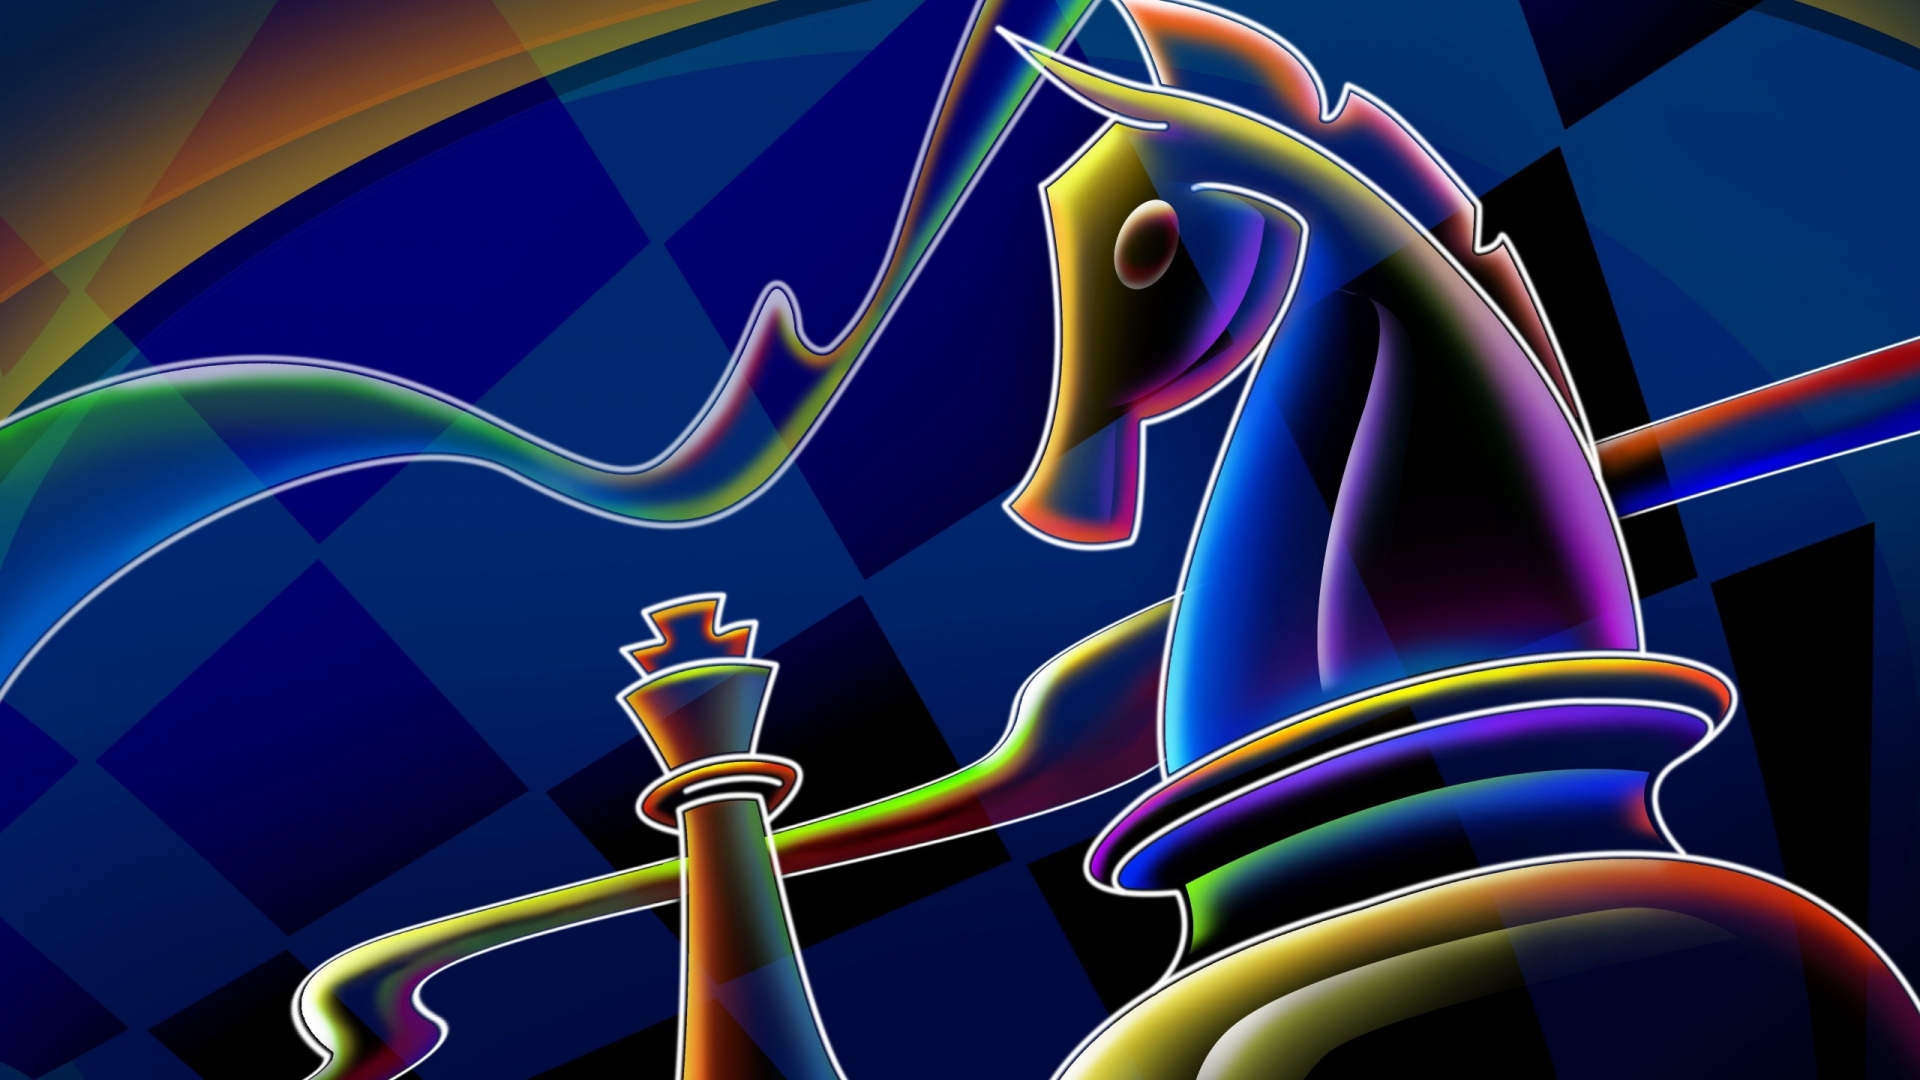 Chess Pieces Drawing for 1920 x 1080 HDTV 1080p resolution